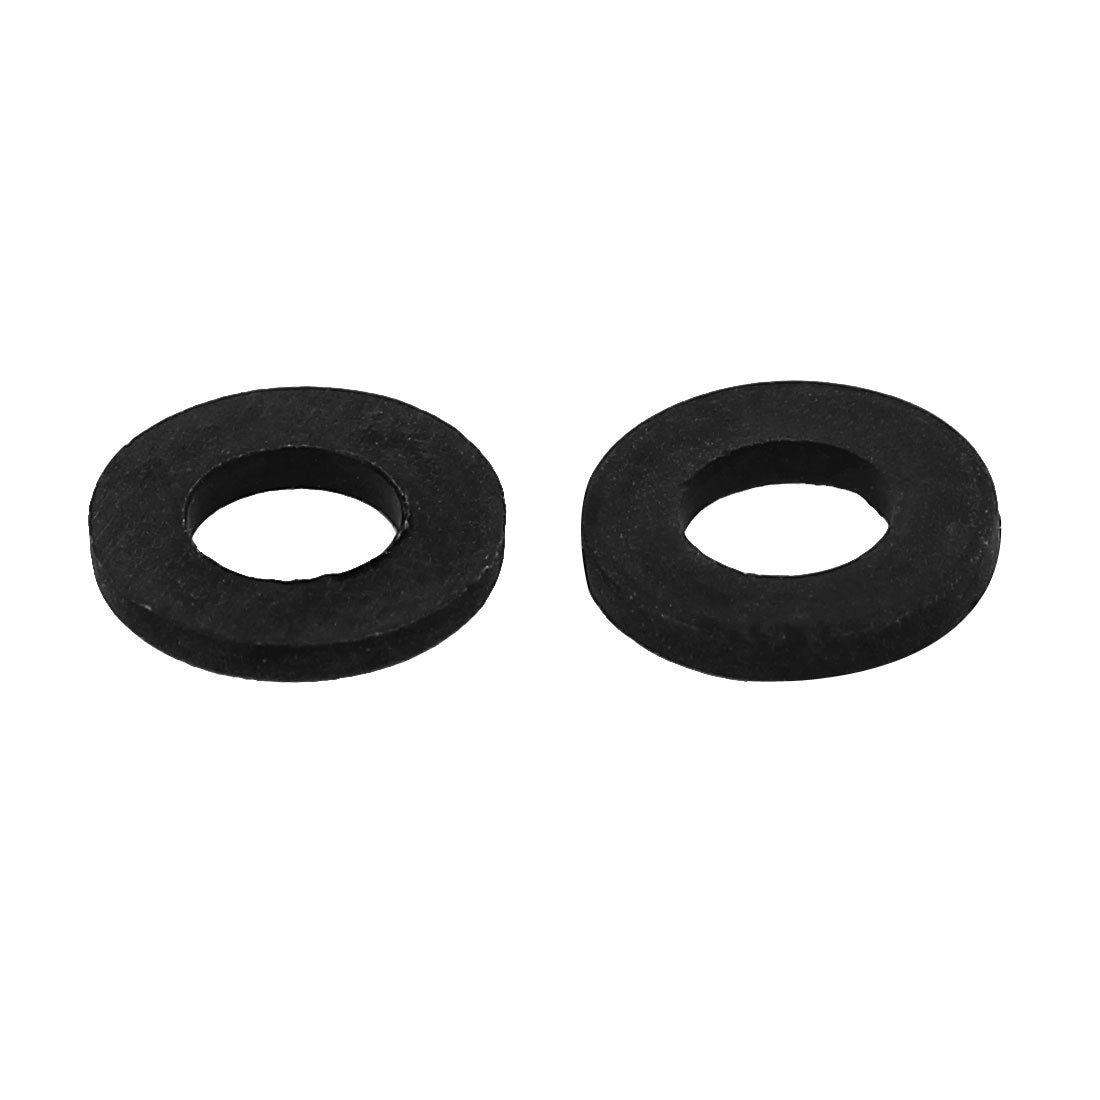 uxcell Uxcell 4mm x 8mm x 1mm Nylon Flat Washers Spacers Gaskets Fastener Black 300PCS